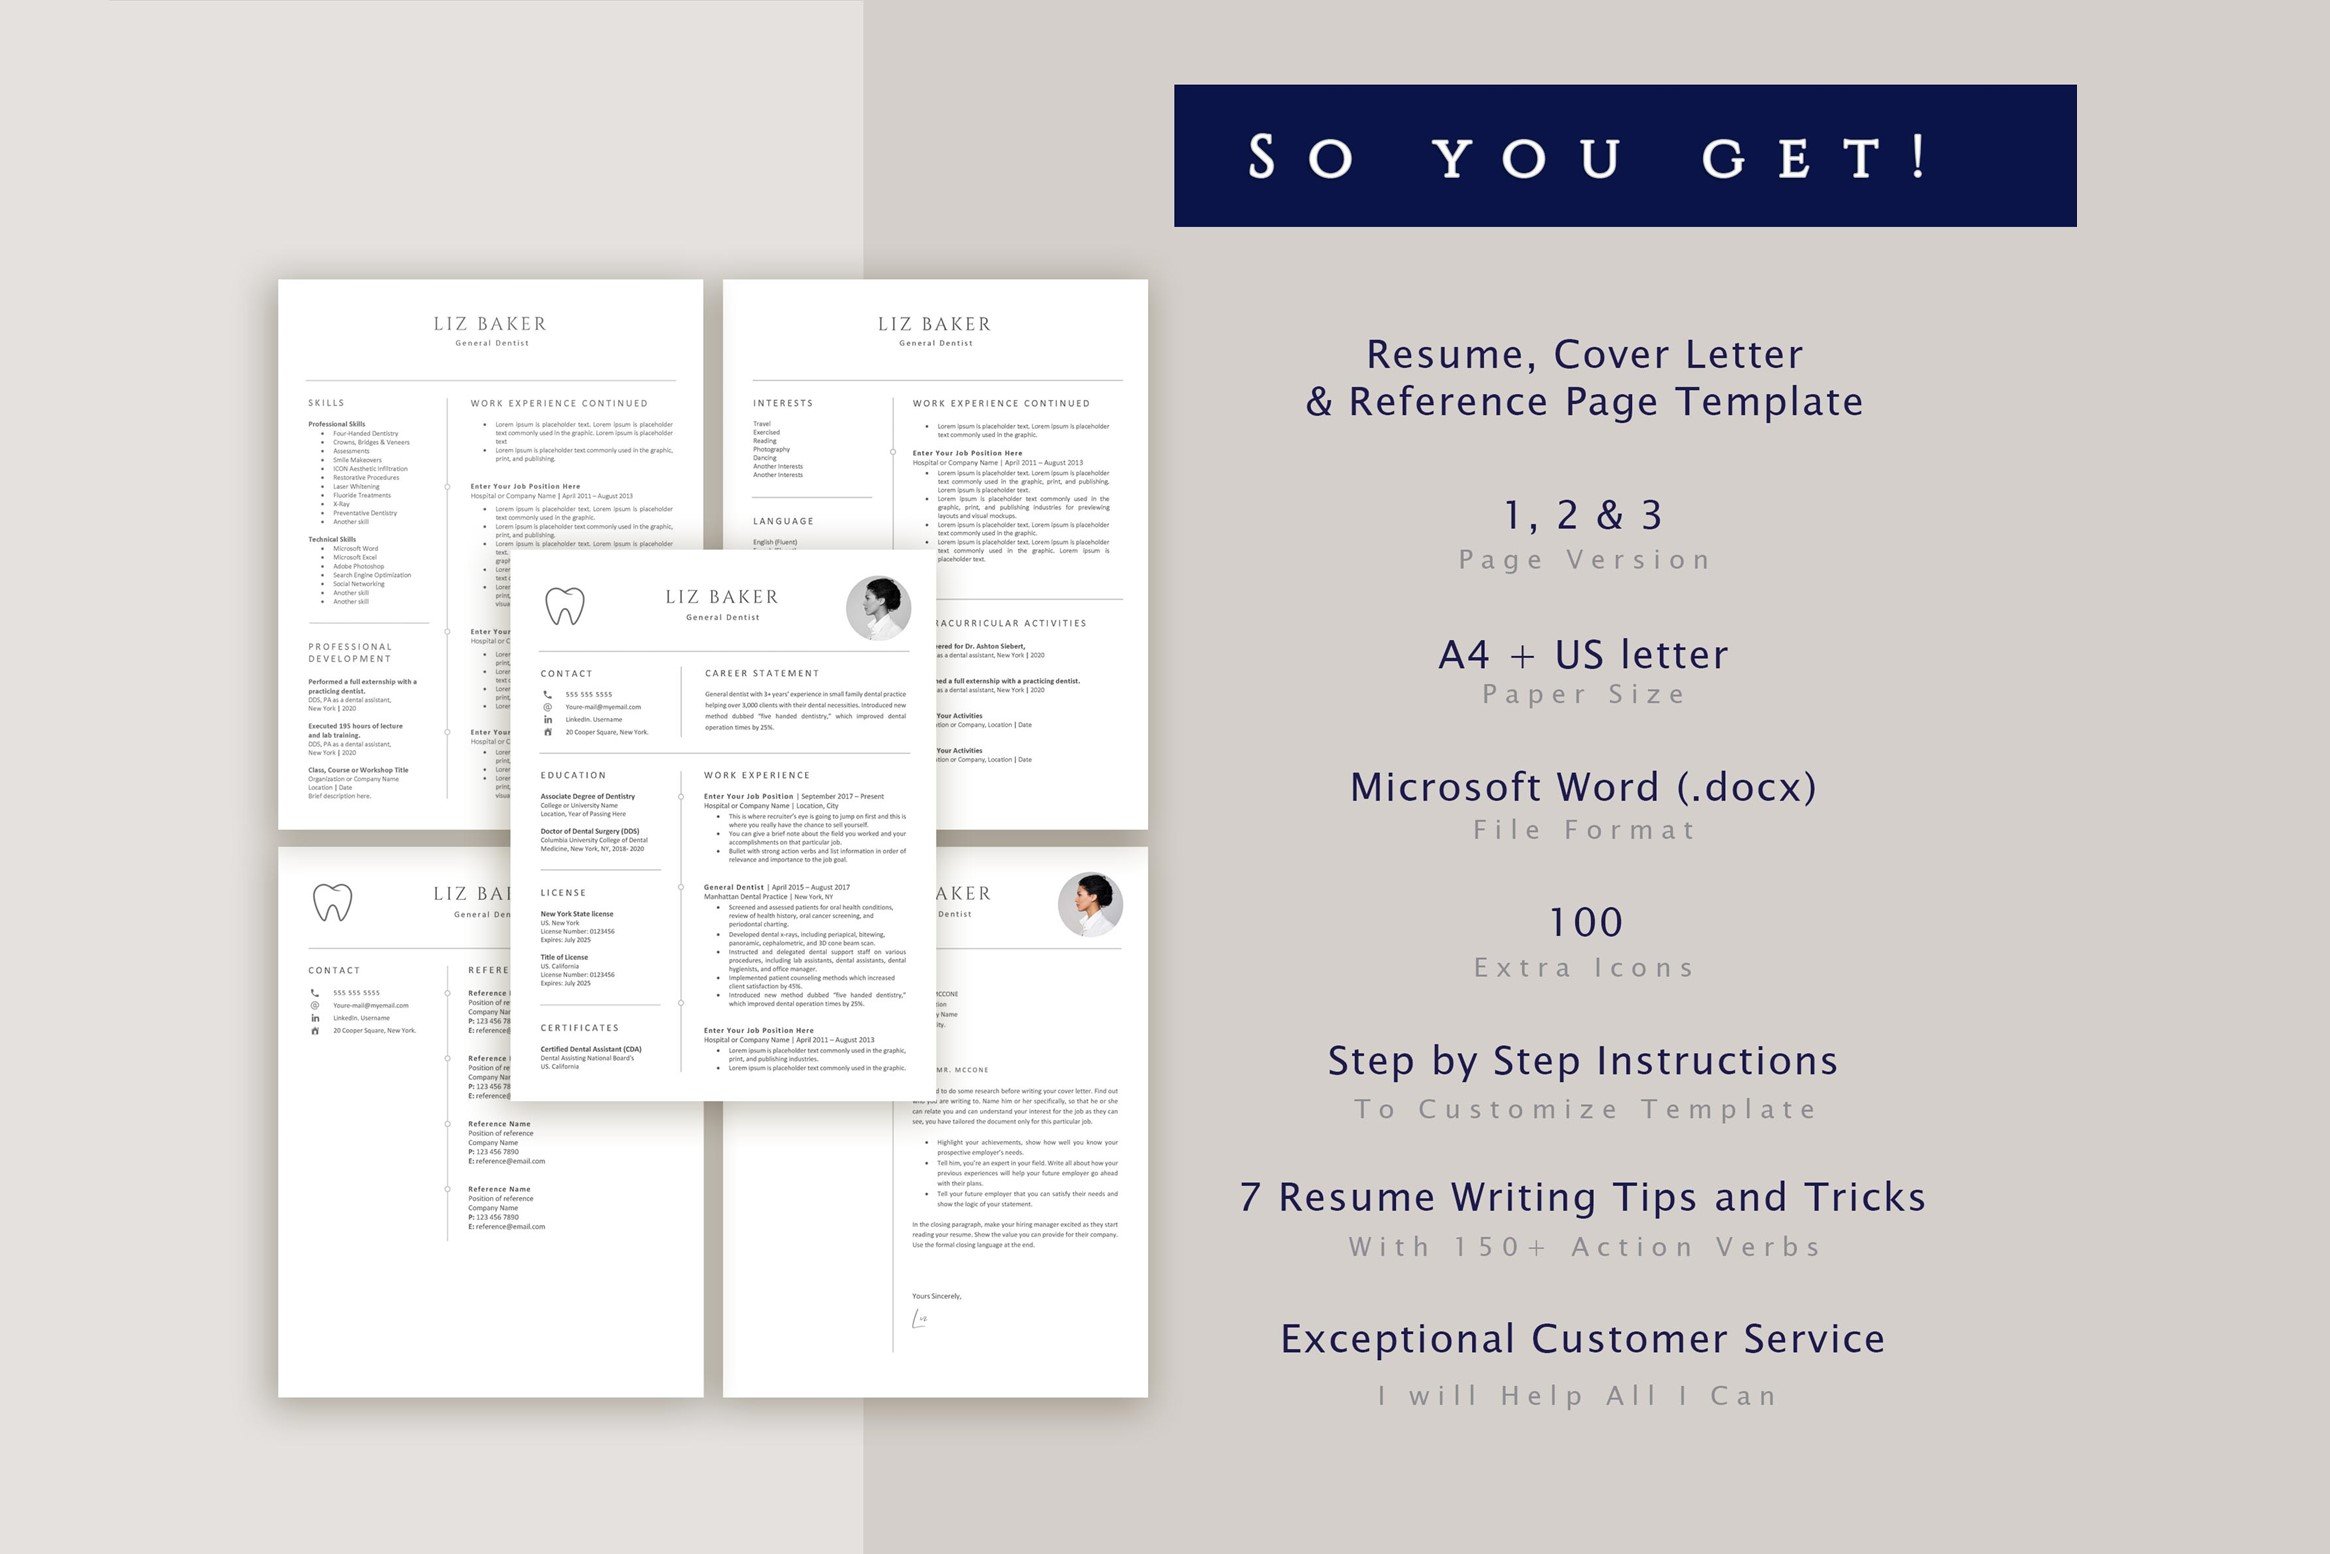 Professional resume template with a cover letter and references.